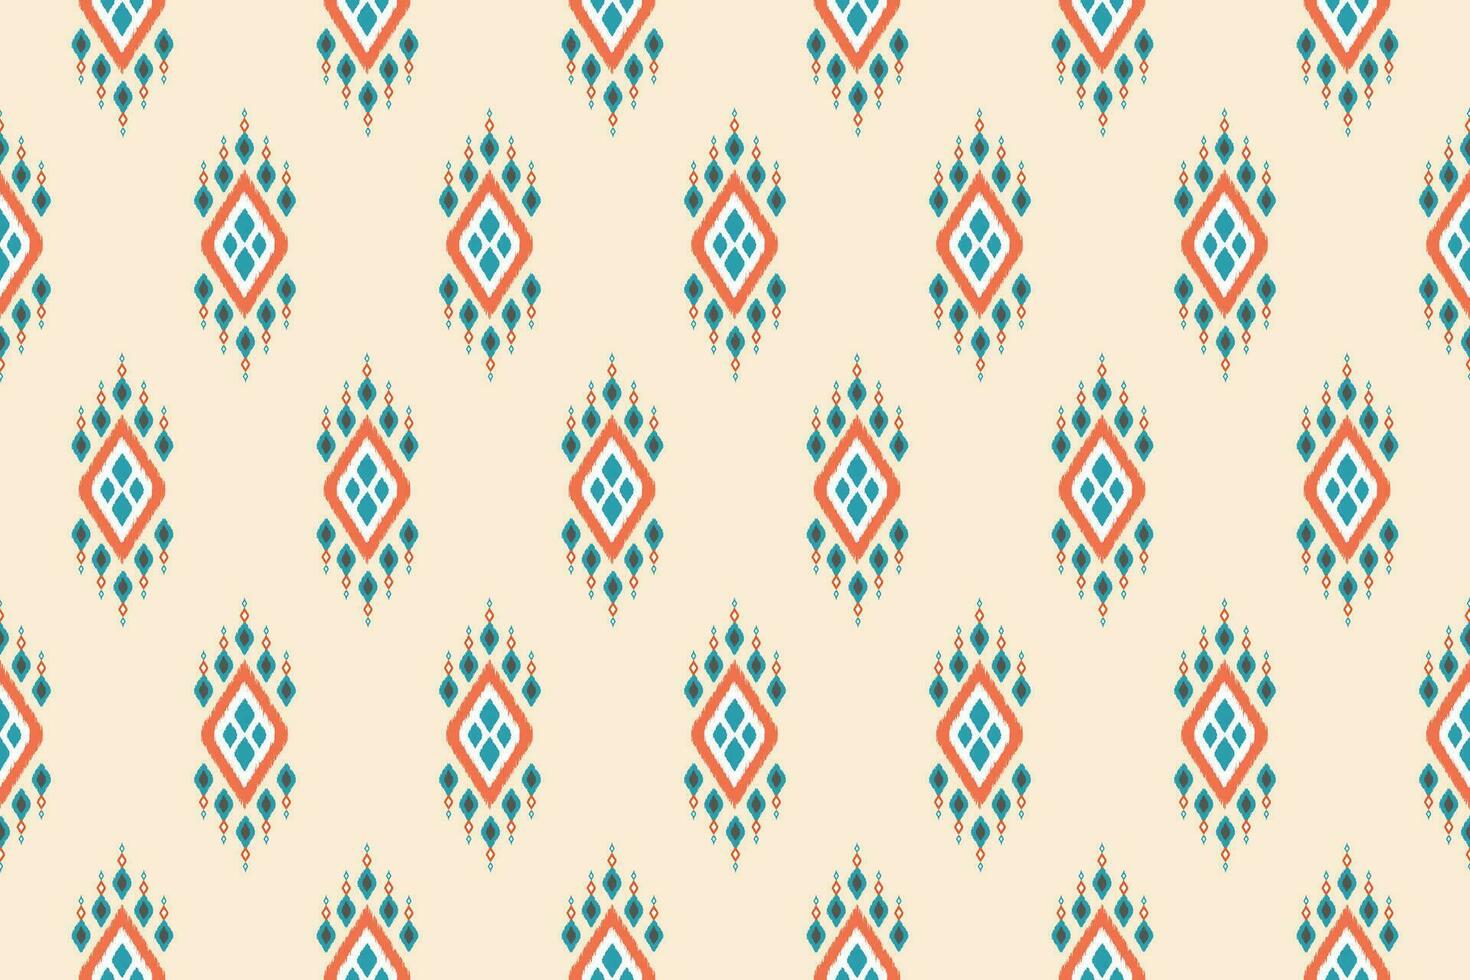 Beautiful Ethnic abstract ikat art. Seamless Kasuri pattern in tribal,folk embroidery,geometric art ornament print.Design for fabric, clothing, carpet, wallpaper, wrapping, cover vector